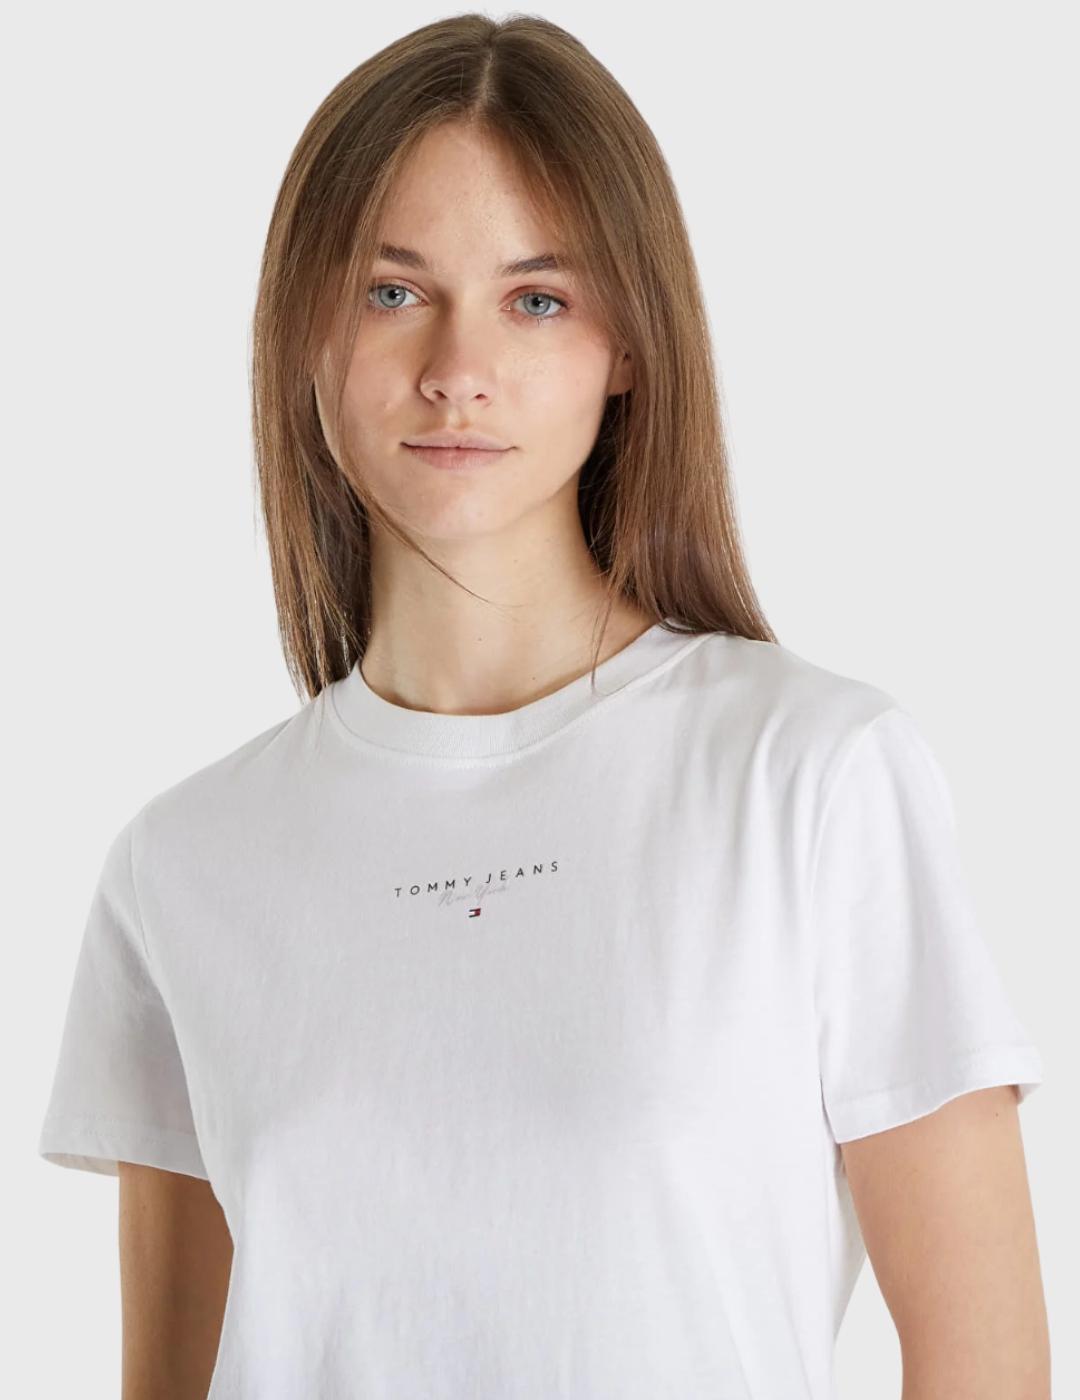 Camiseta Tommy Jeans Essential Logo Blanca Mujer